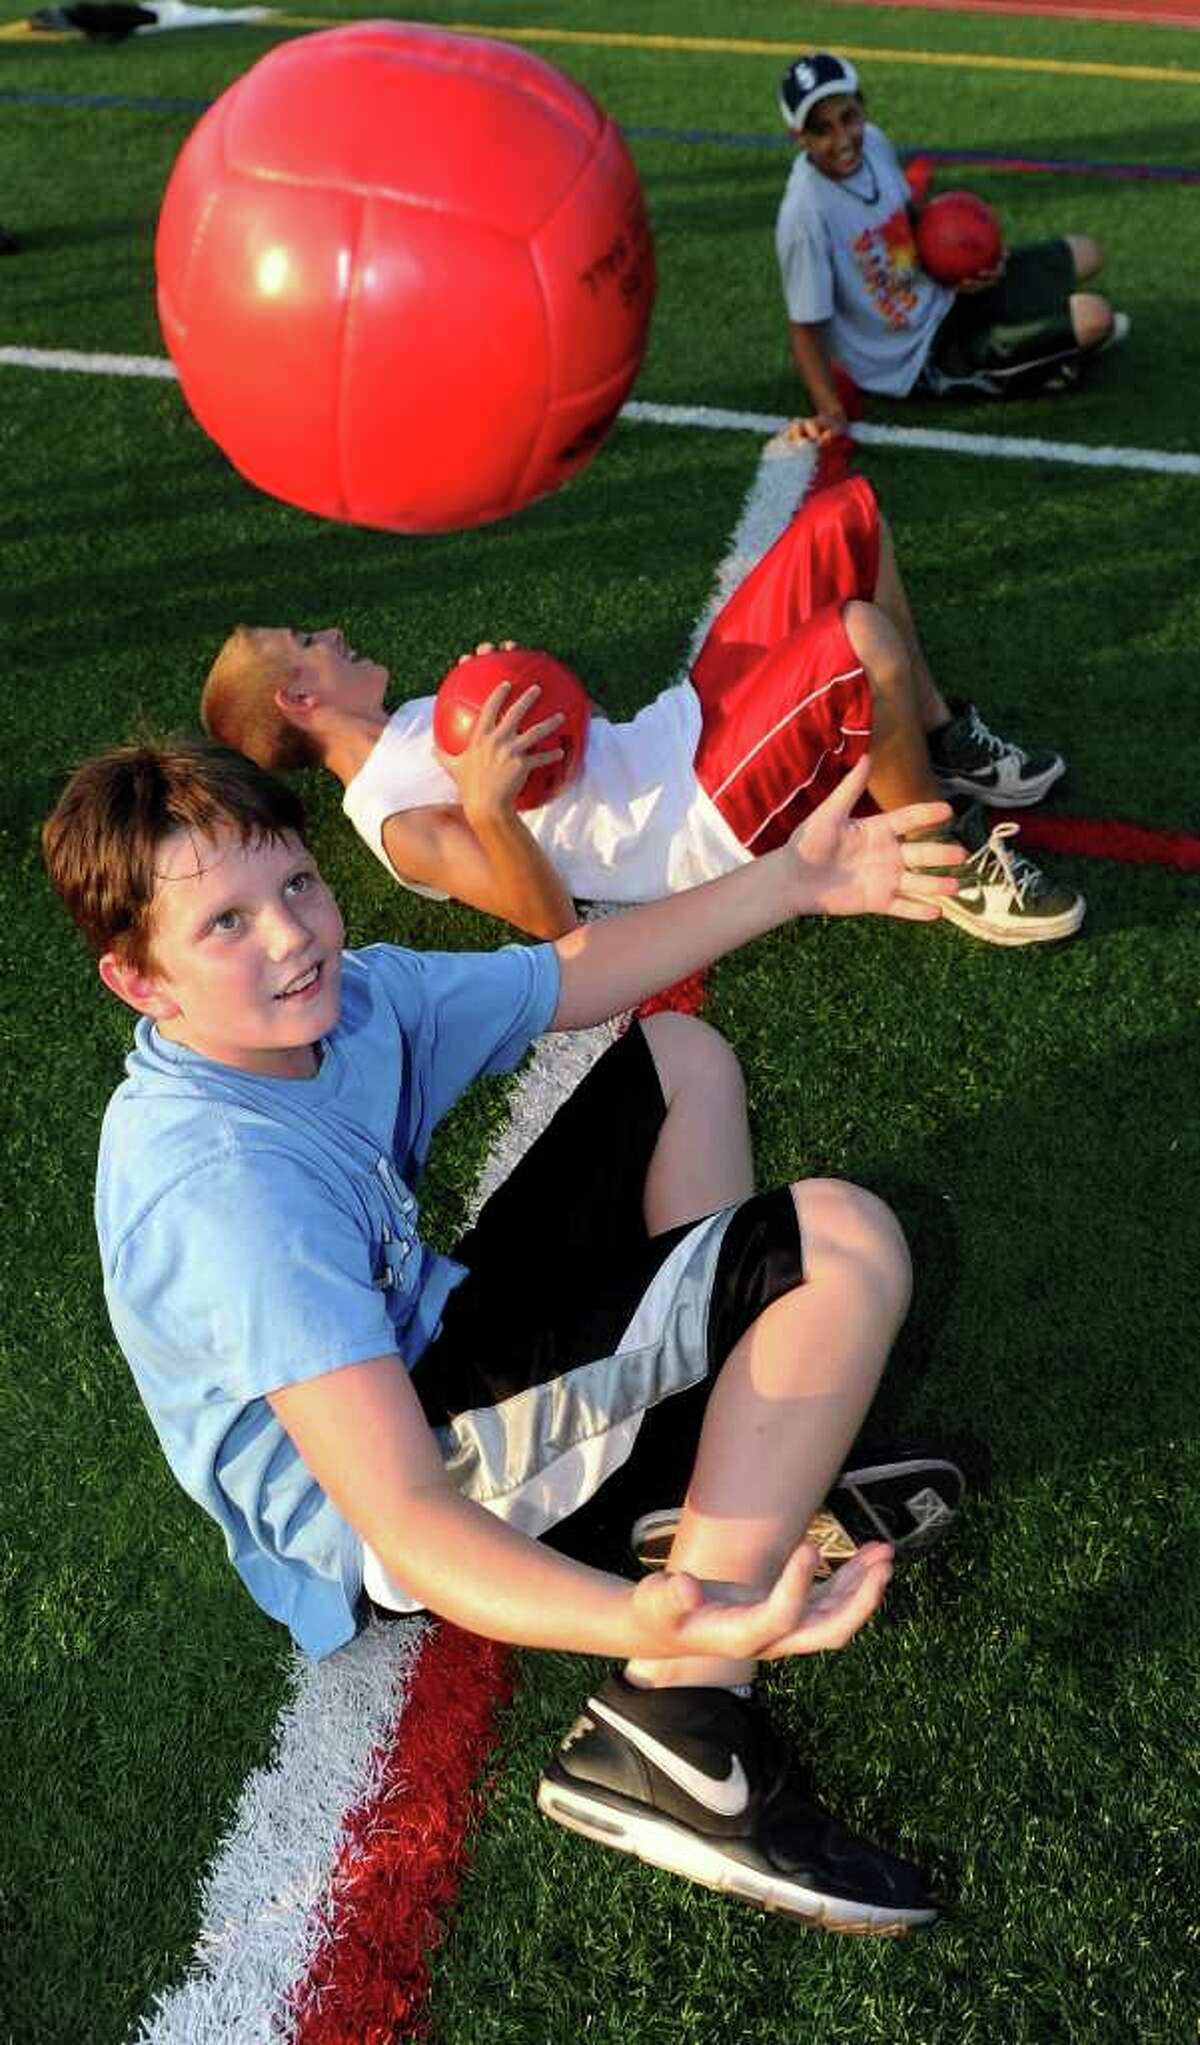 Ryan Holbrook, 11, practices a fitness drill during the Chelsea Cohen Fitness Academy Kickoff at Norwalk High School's Testa Field on Thursday, August 5, 2010.